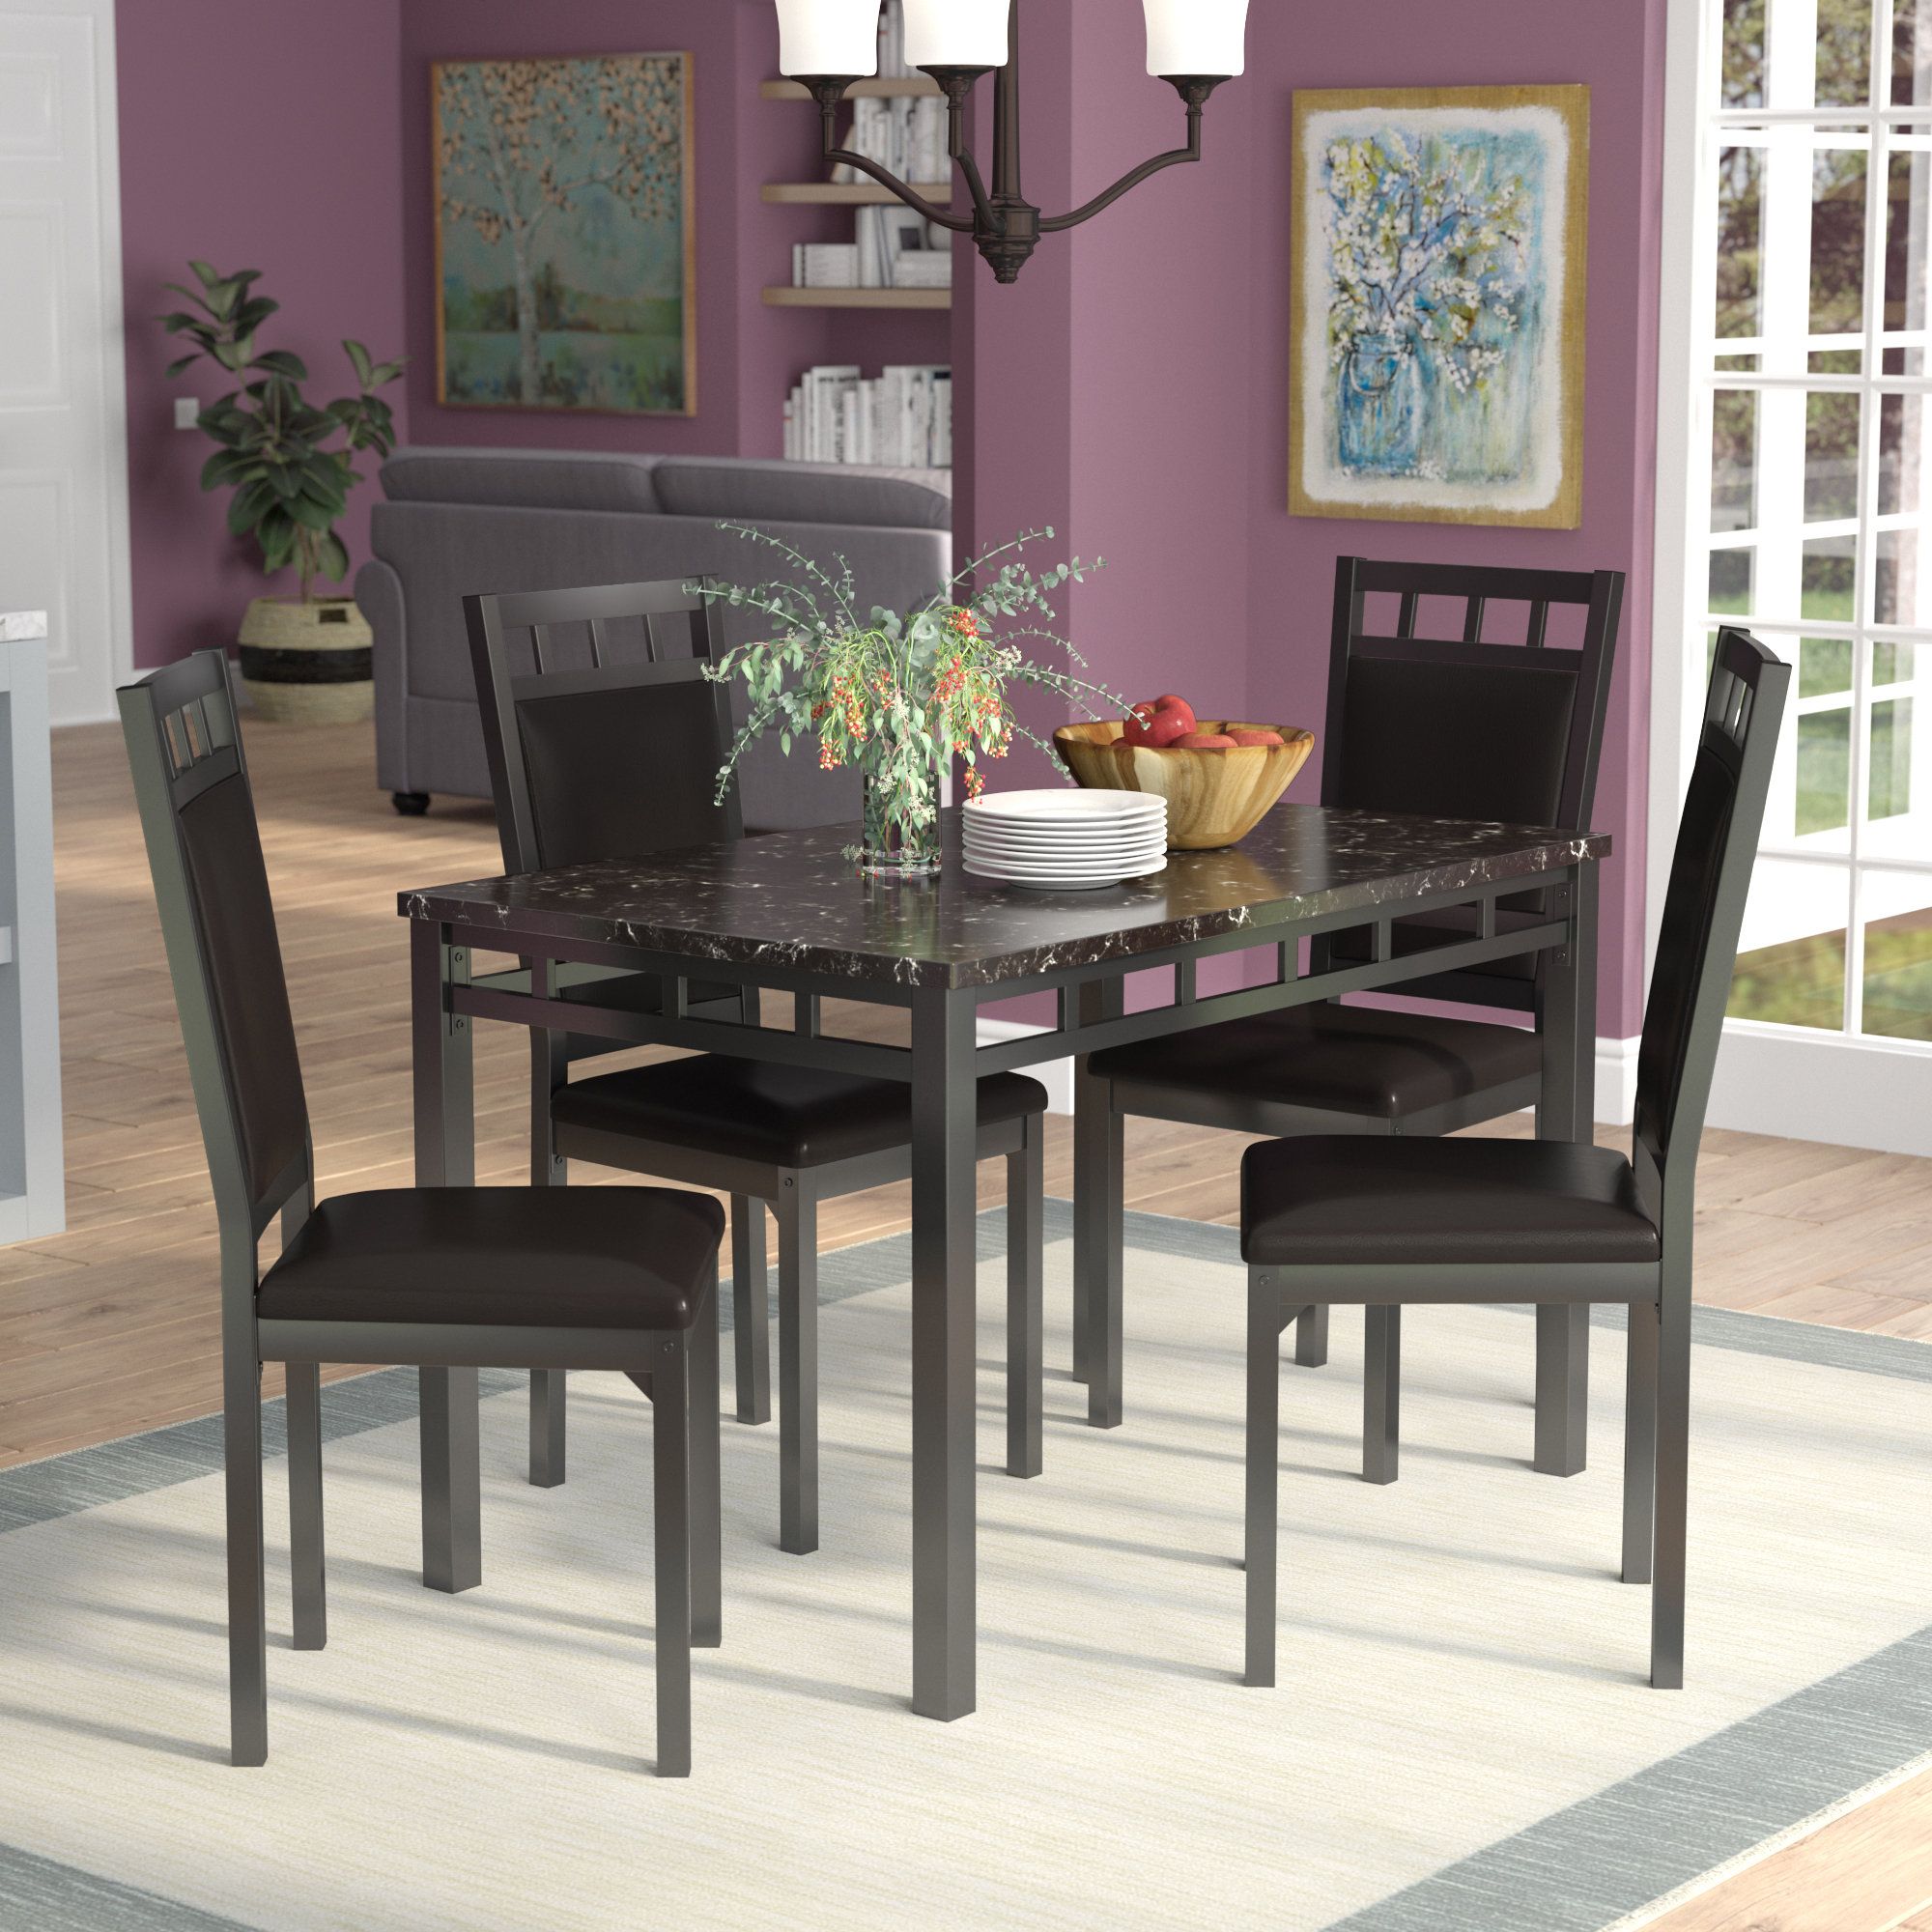 Bernice 5 Piece Dining Set Pertaining To Current Maynard 5 Piece Dining Sets (View 4 of 20)